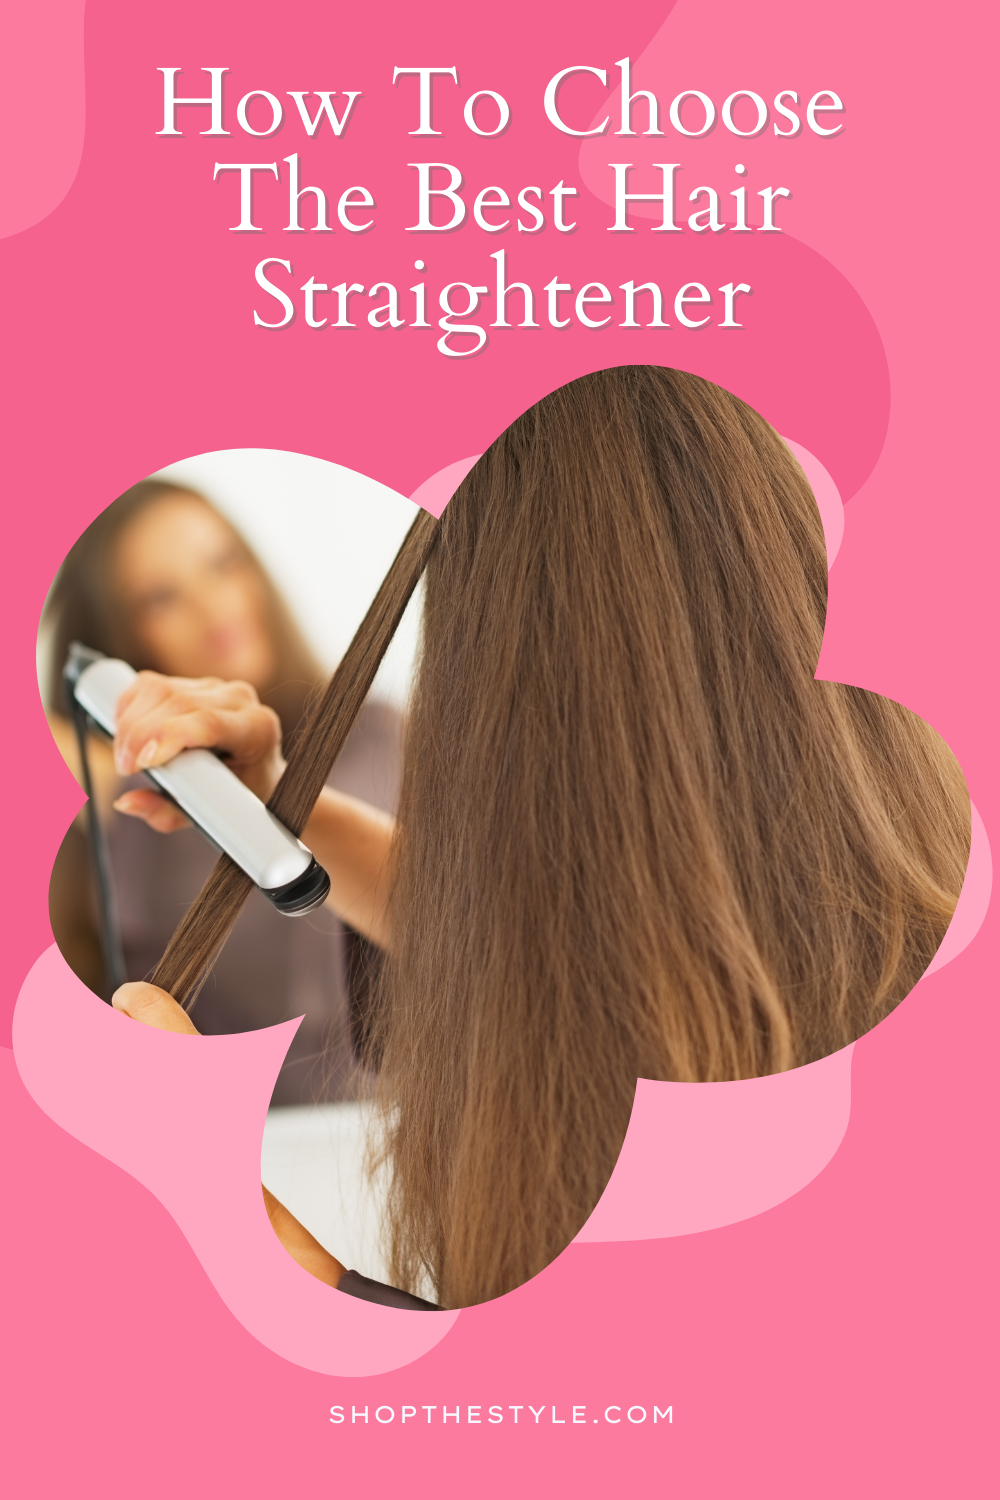 How To Choose The Best Hair Straightener